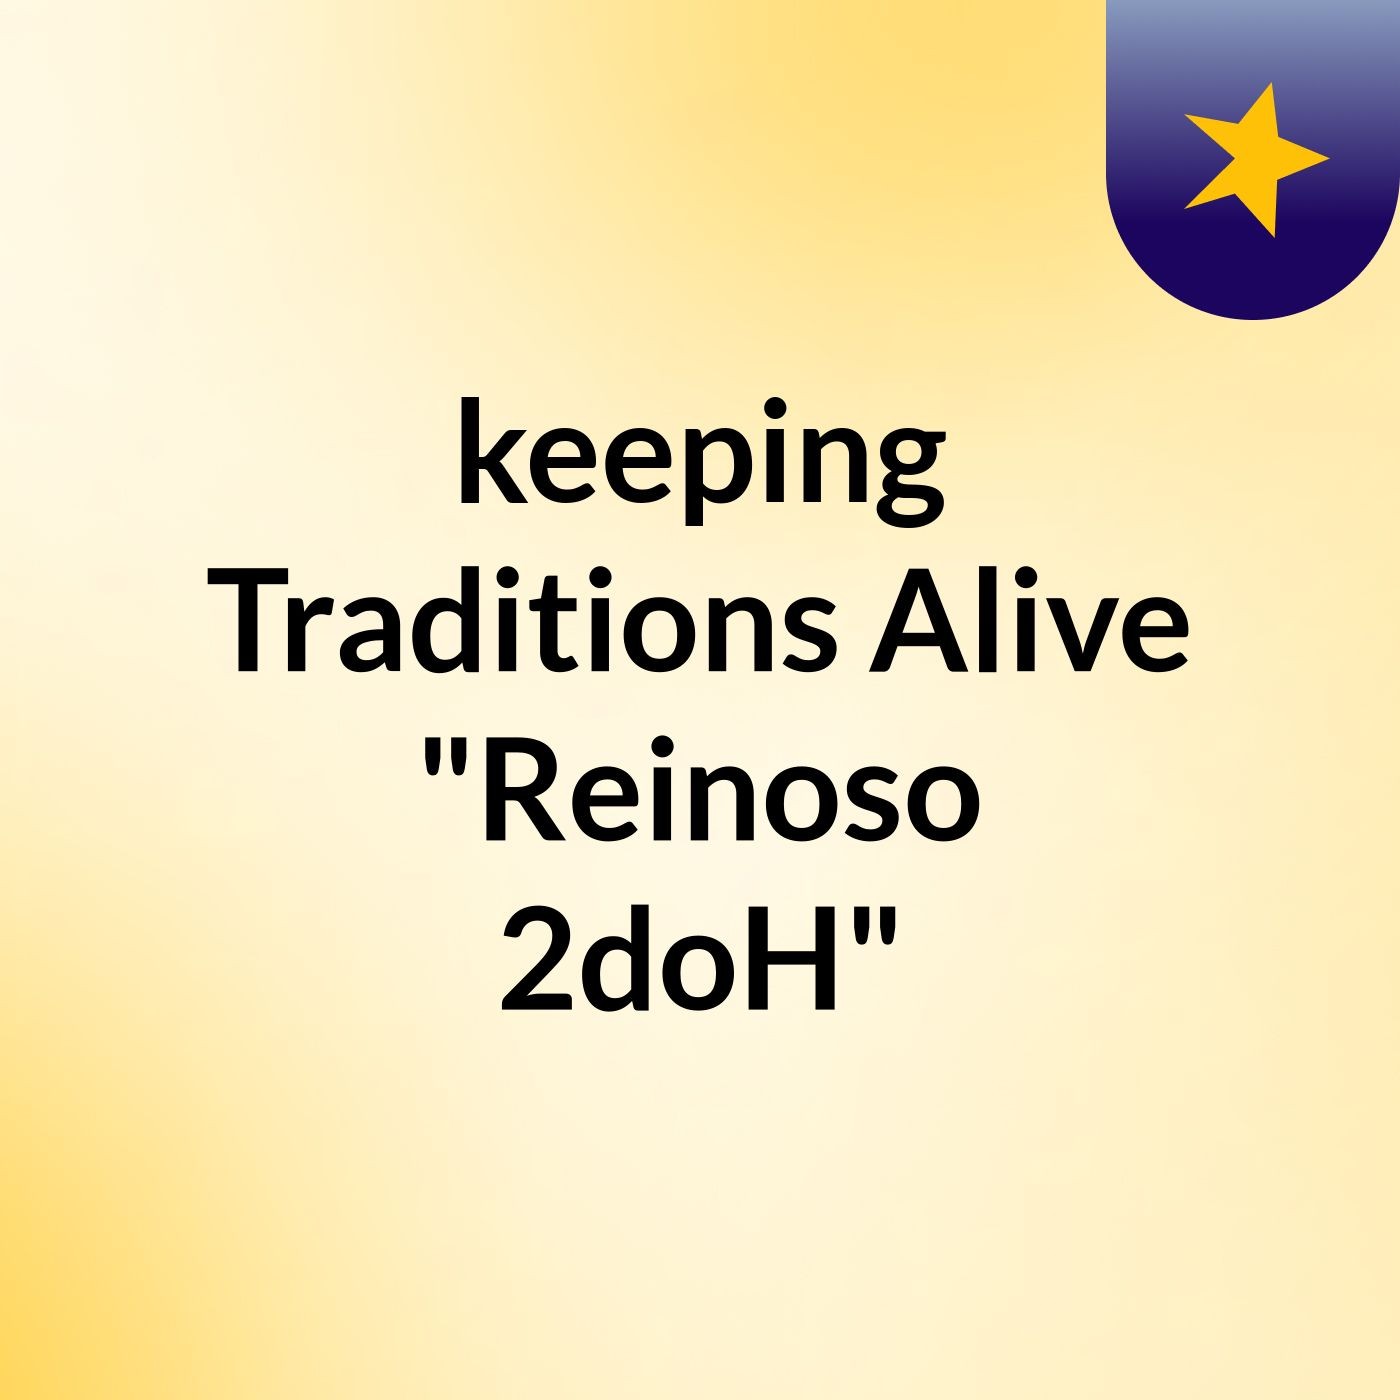 keeping Traditions Alive "Reinoso 2doH"